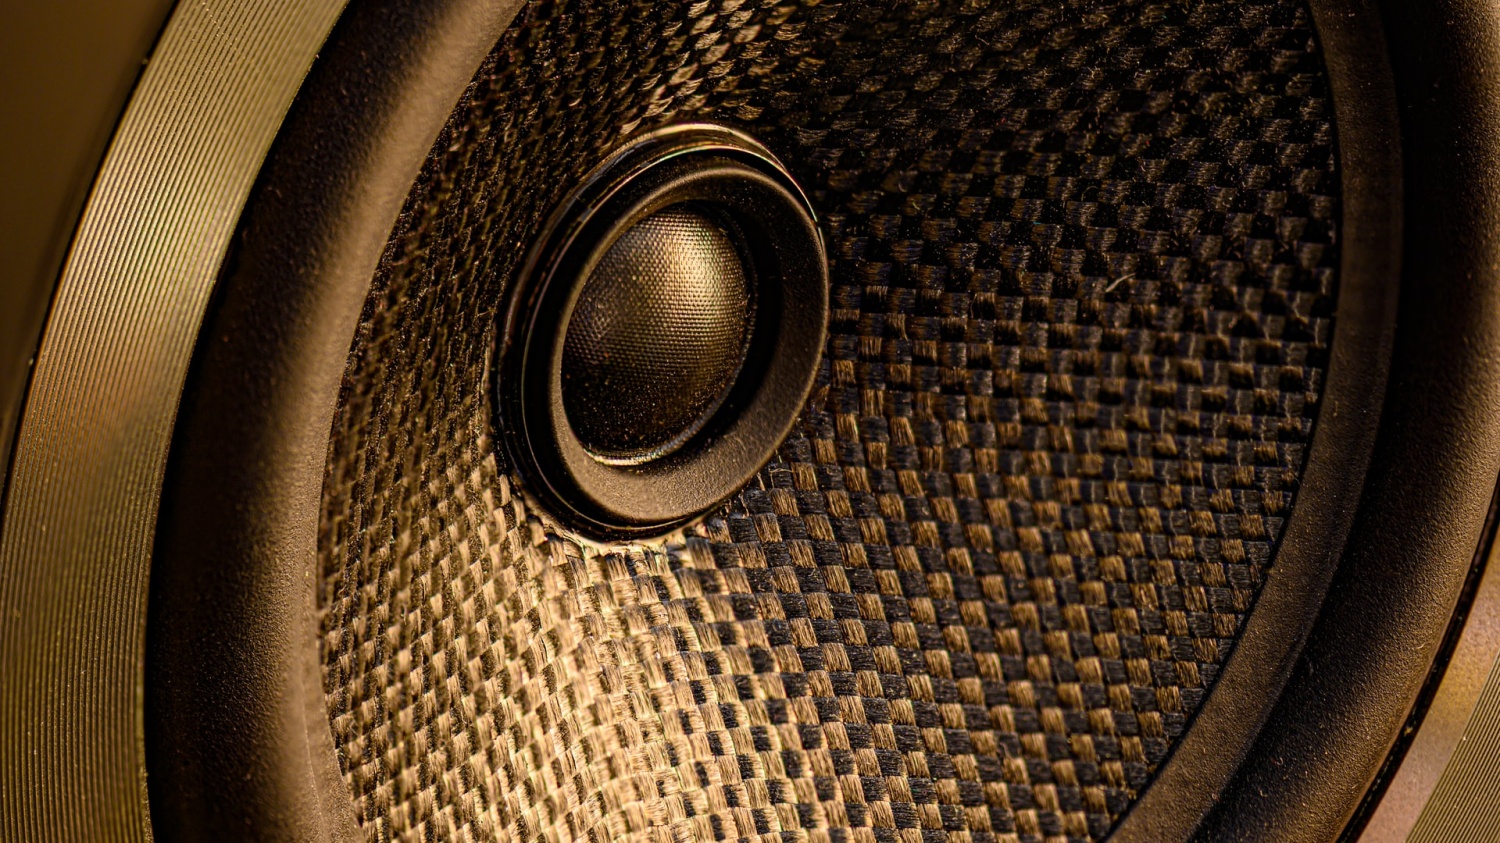 5 Audio Systems That Make You Not Want To Leave The Car